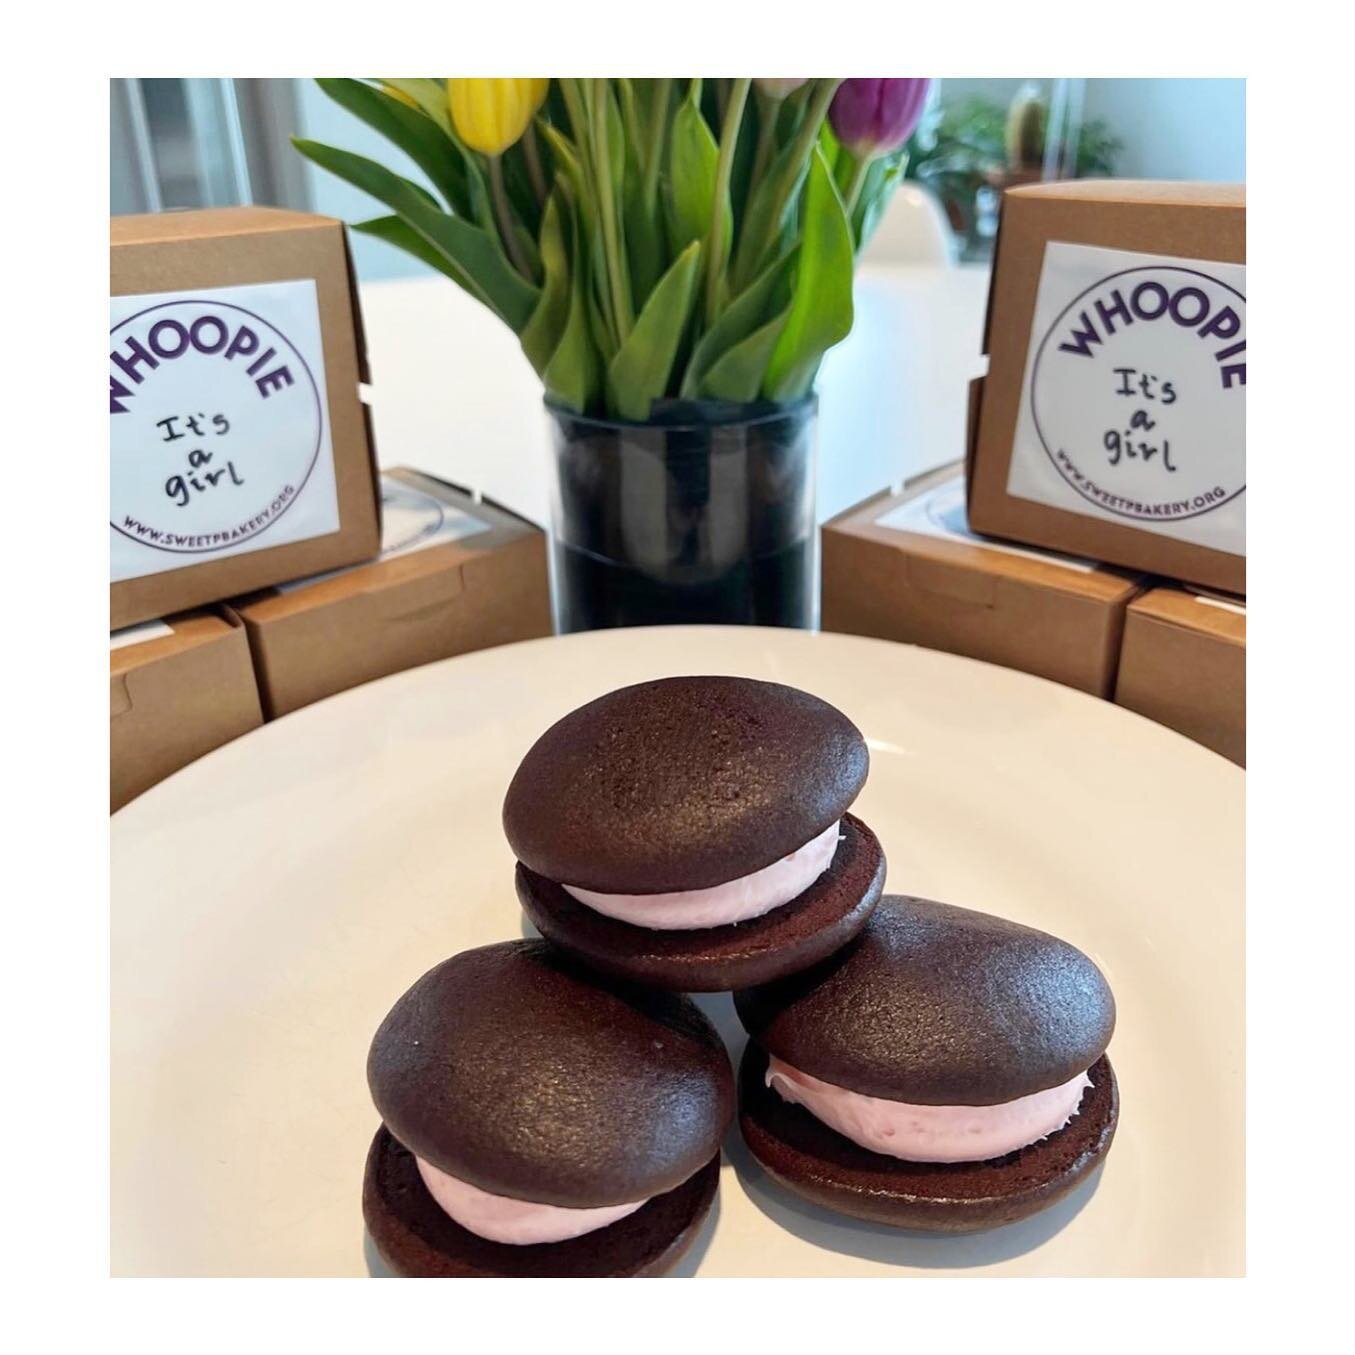 It was a very Special Delivery💗

@sweetpbakeryct Whoopie Pies went pink 💗 for a special event. 

Having a special day that deserves a WHOOPEEEEE? 

Our bakers at Sweet P Bakery can BAKE your end of school celebration, graduation day, new home, birt